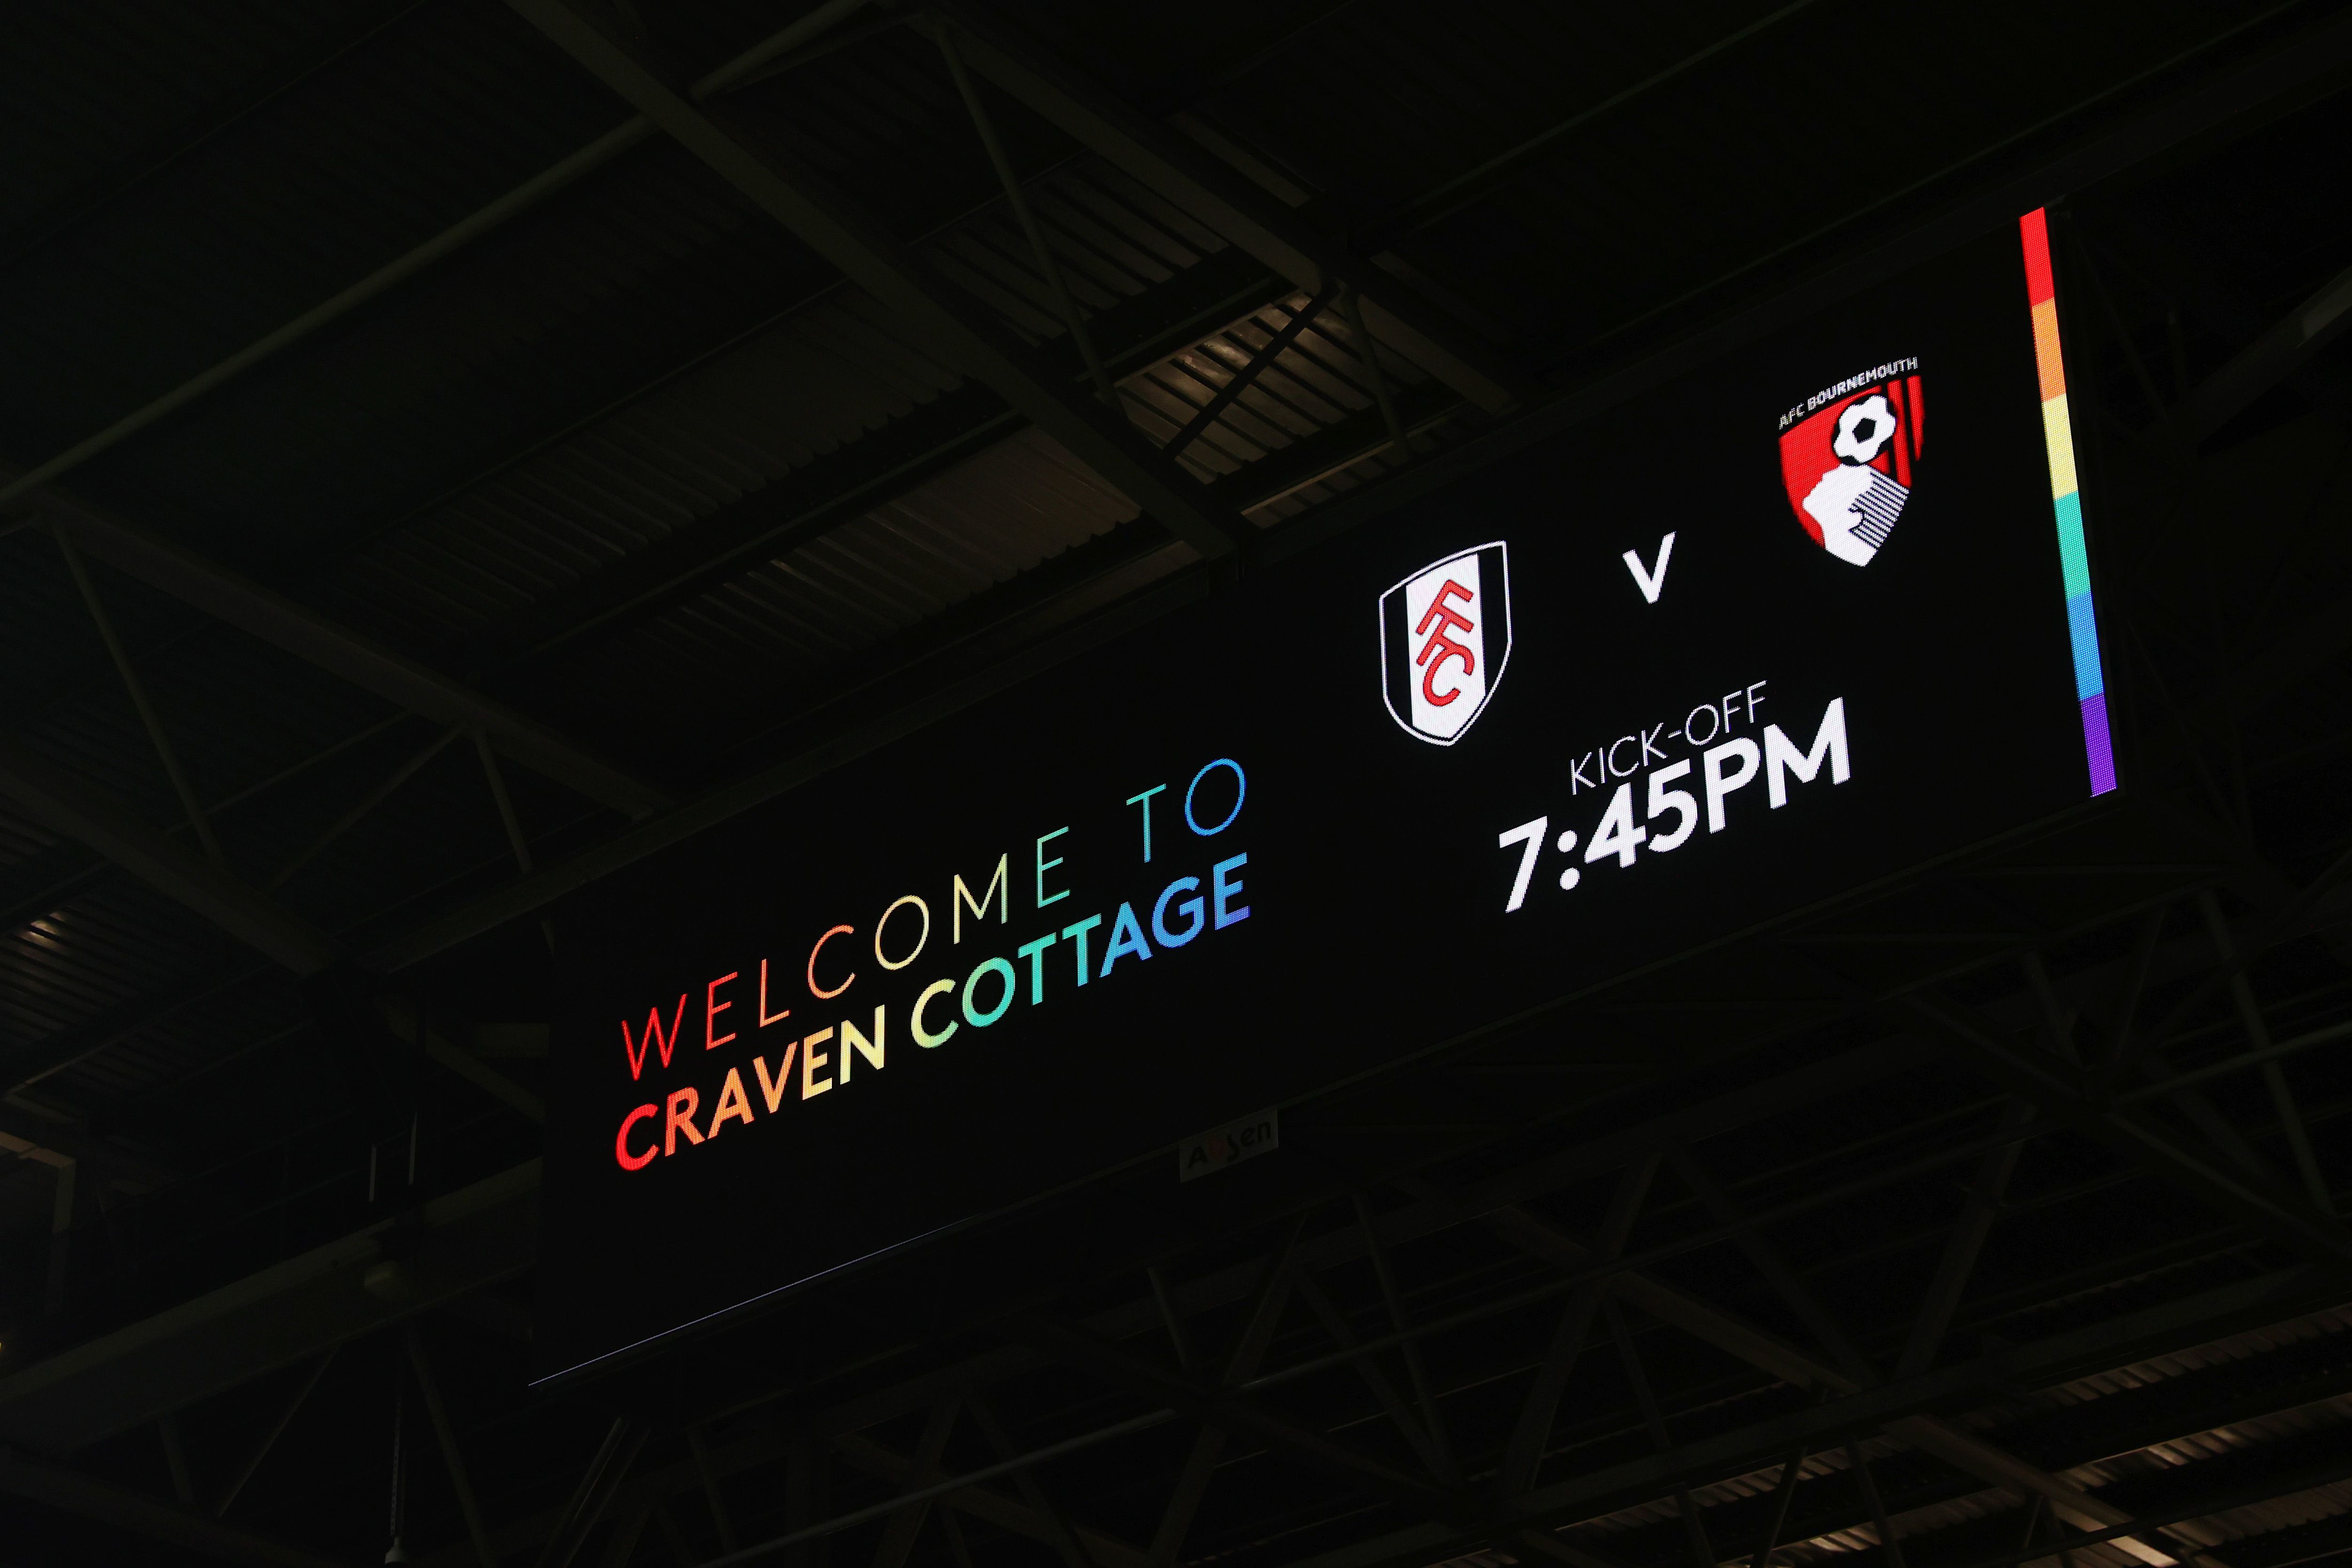 General view of the LED board inside Craven Cottage